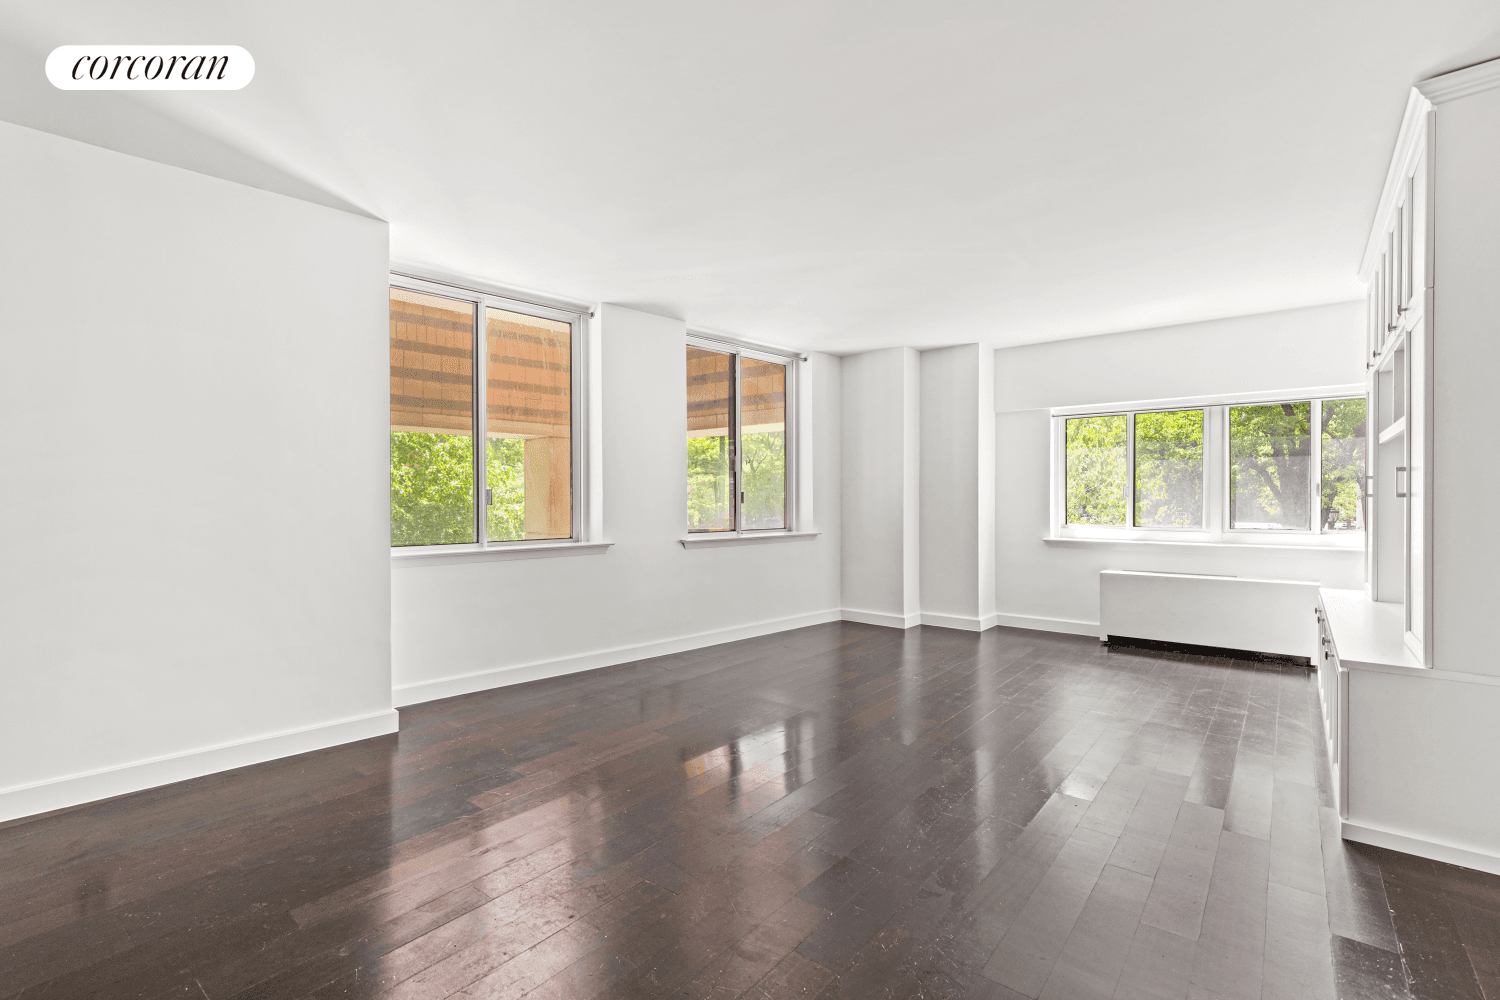 NEW PRICE 7700 Welcome to 333 Rector Place 204, a 2 bed 2 bath gem tucked away in the heart of Battery Park City.